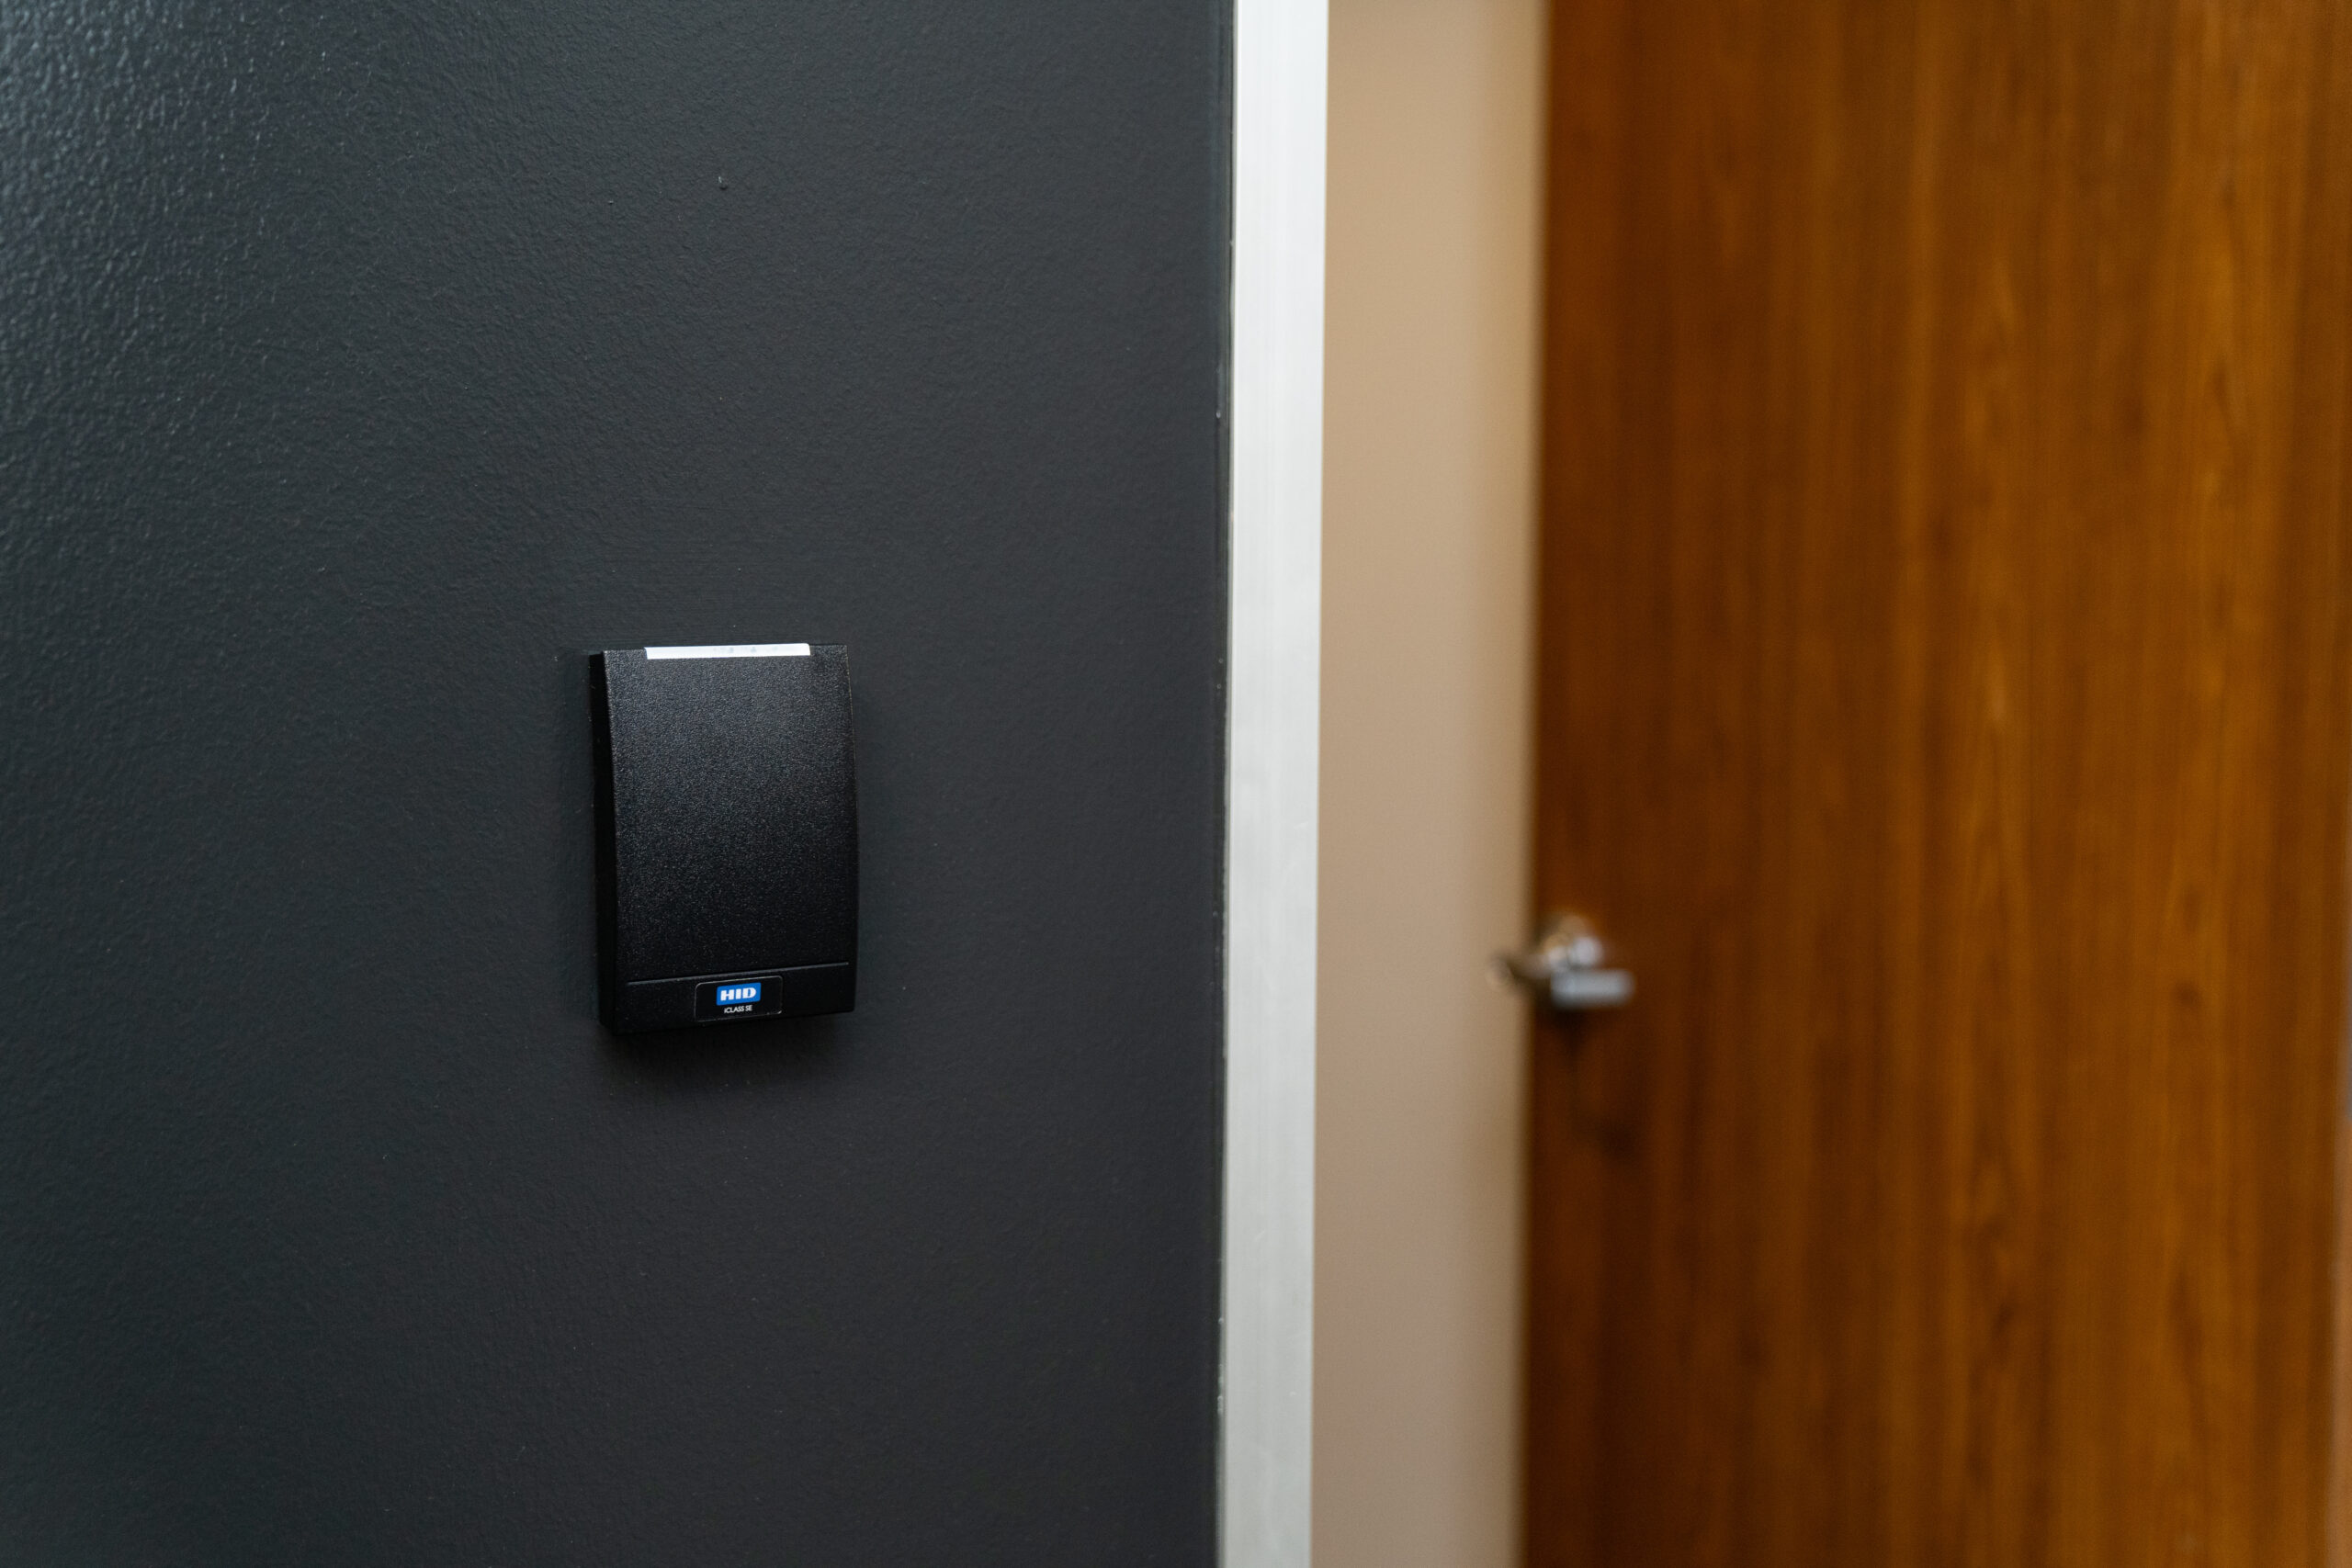 Access Control Systems - a card reader by a door that is controlled by an ACS